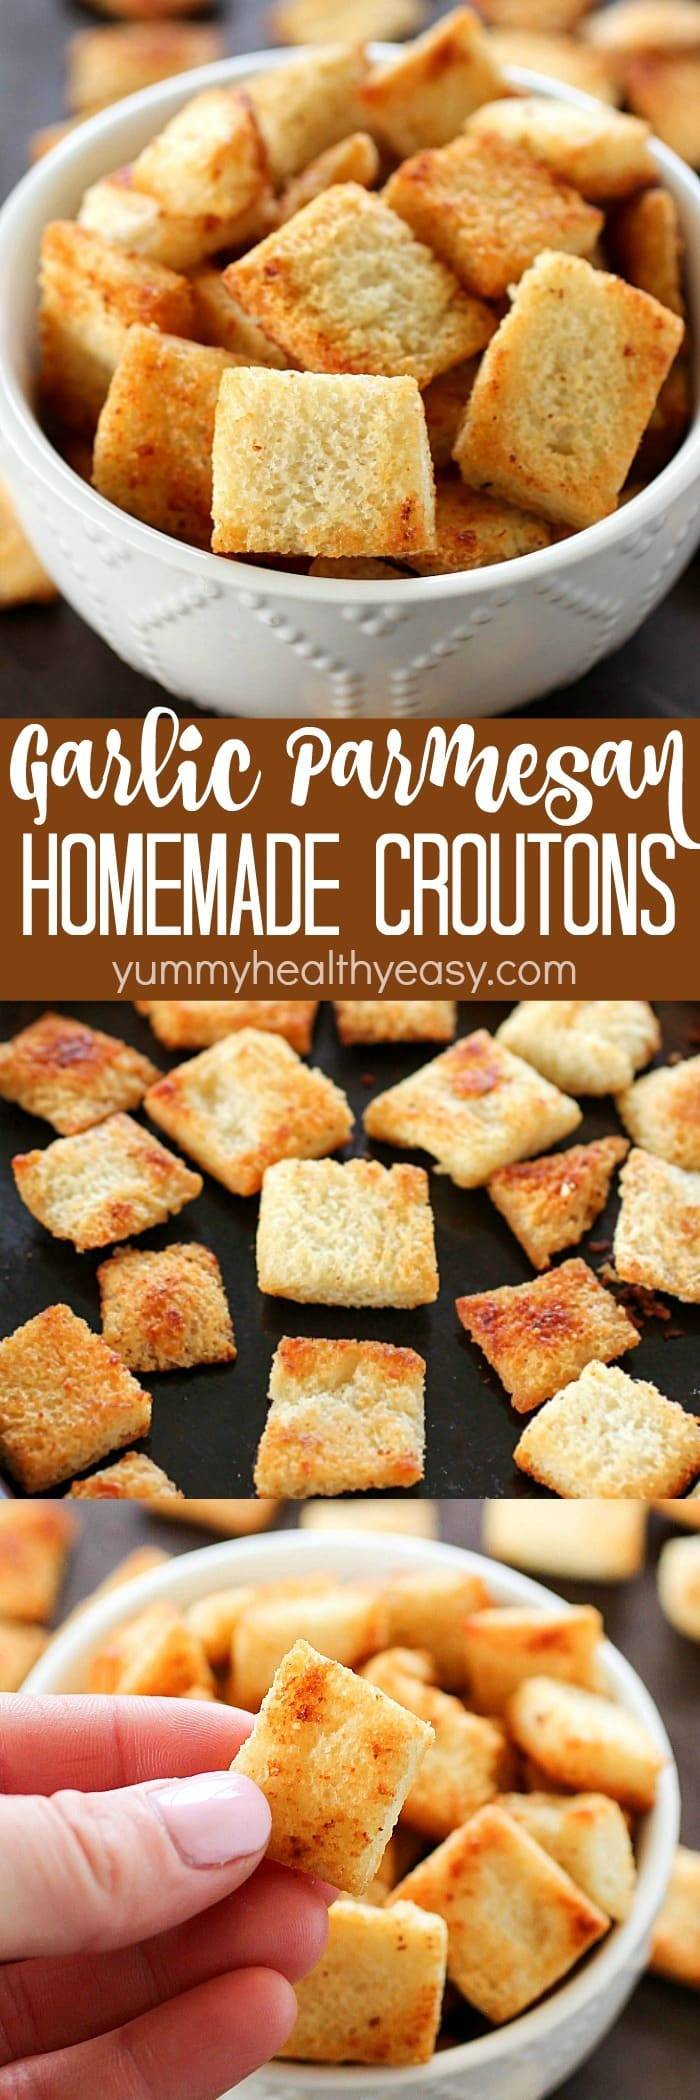 Are Croutons Healthy
 Garlic Parmesan Homemade Croutons Yummy Healthy Easy